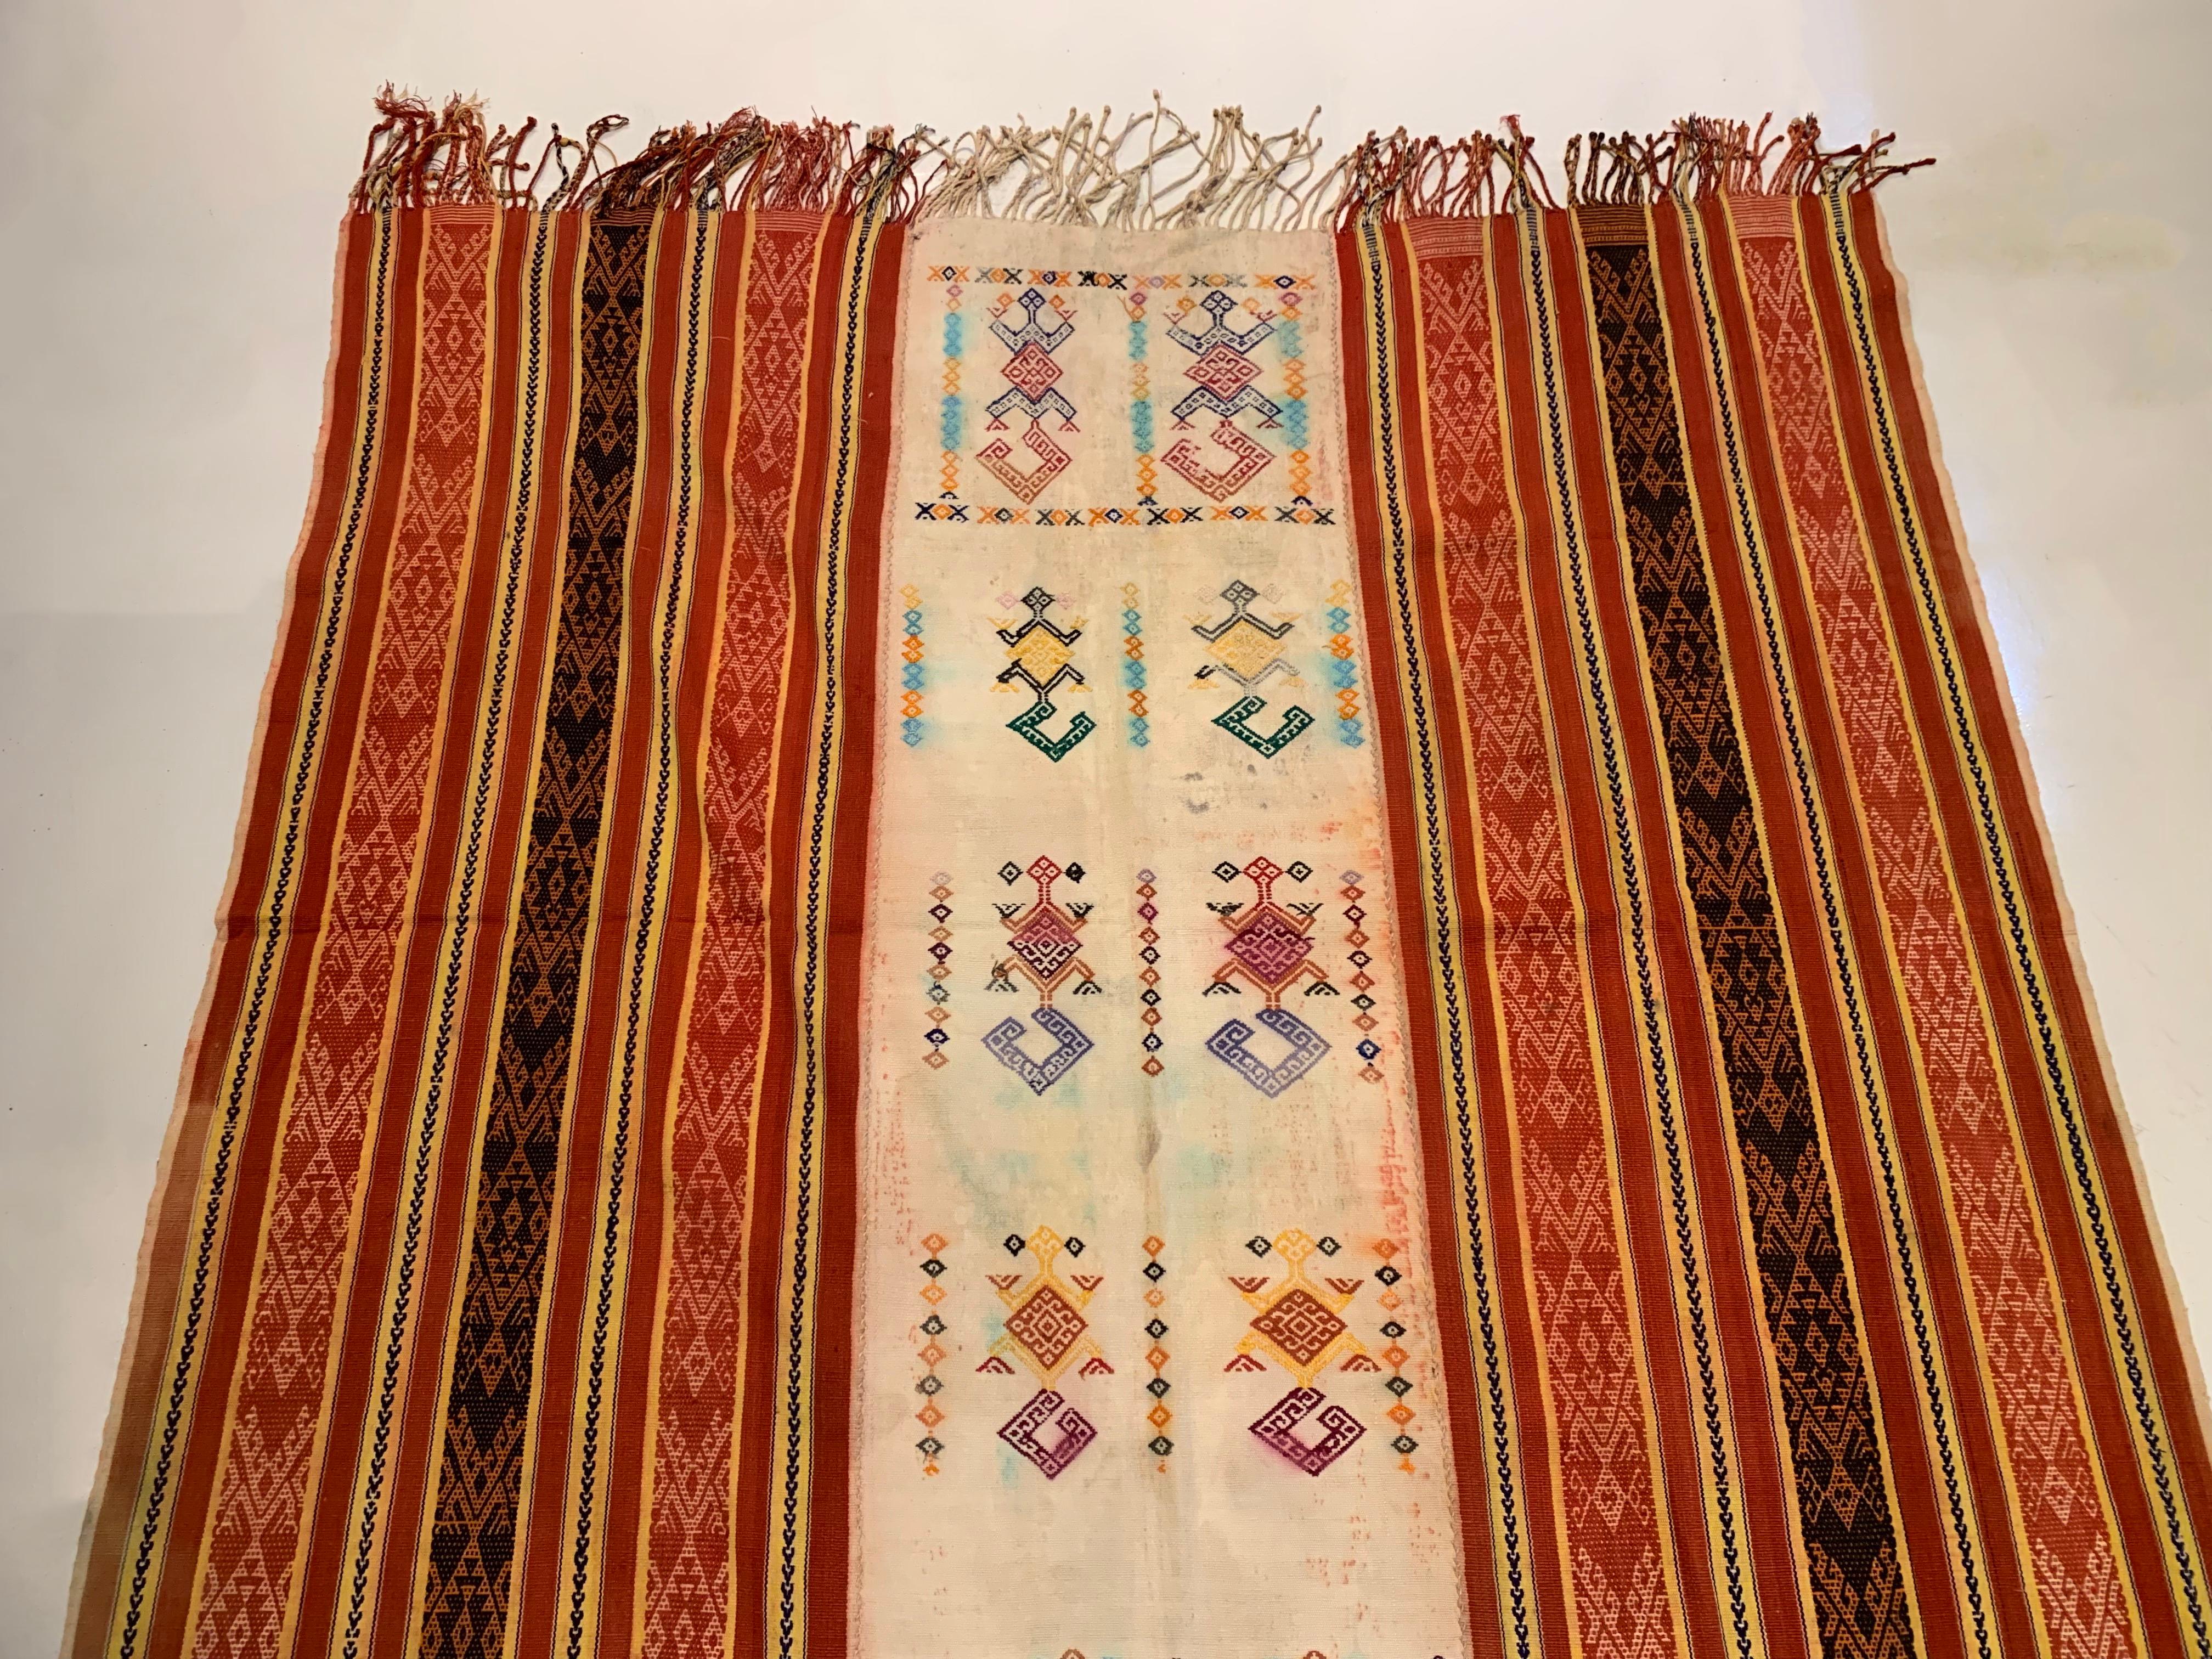 Mid-20th Century Ikat Textile from Timor Stunning Tribal Motifs & Colors, Indonesia c. 1950 For Sale